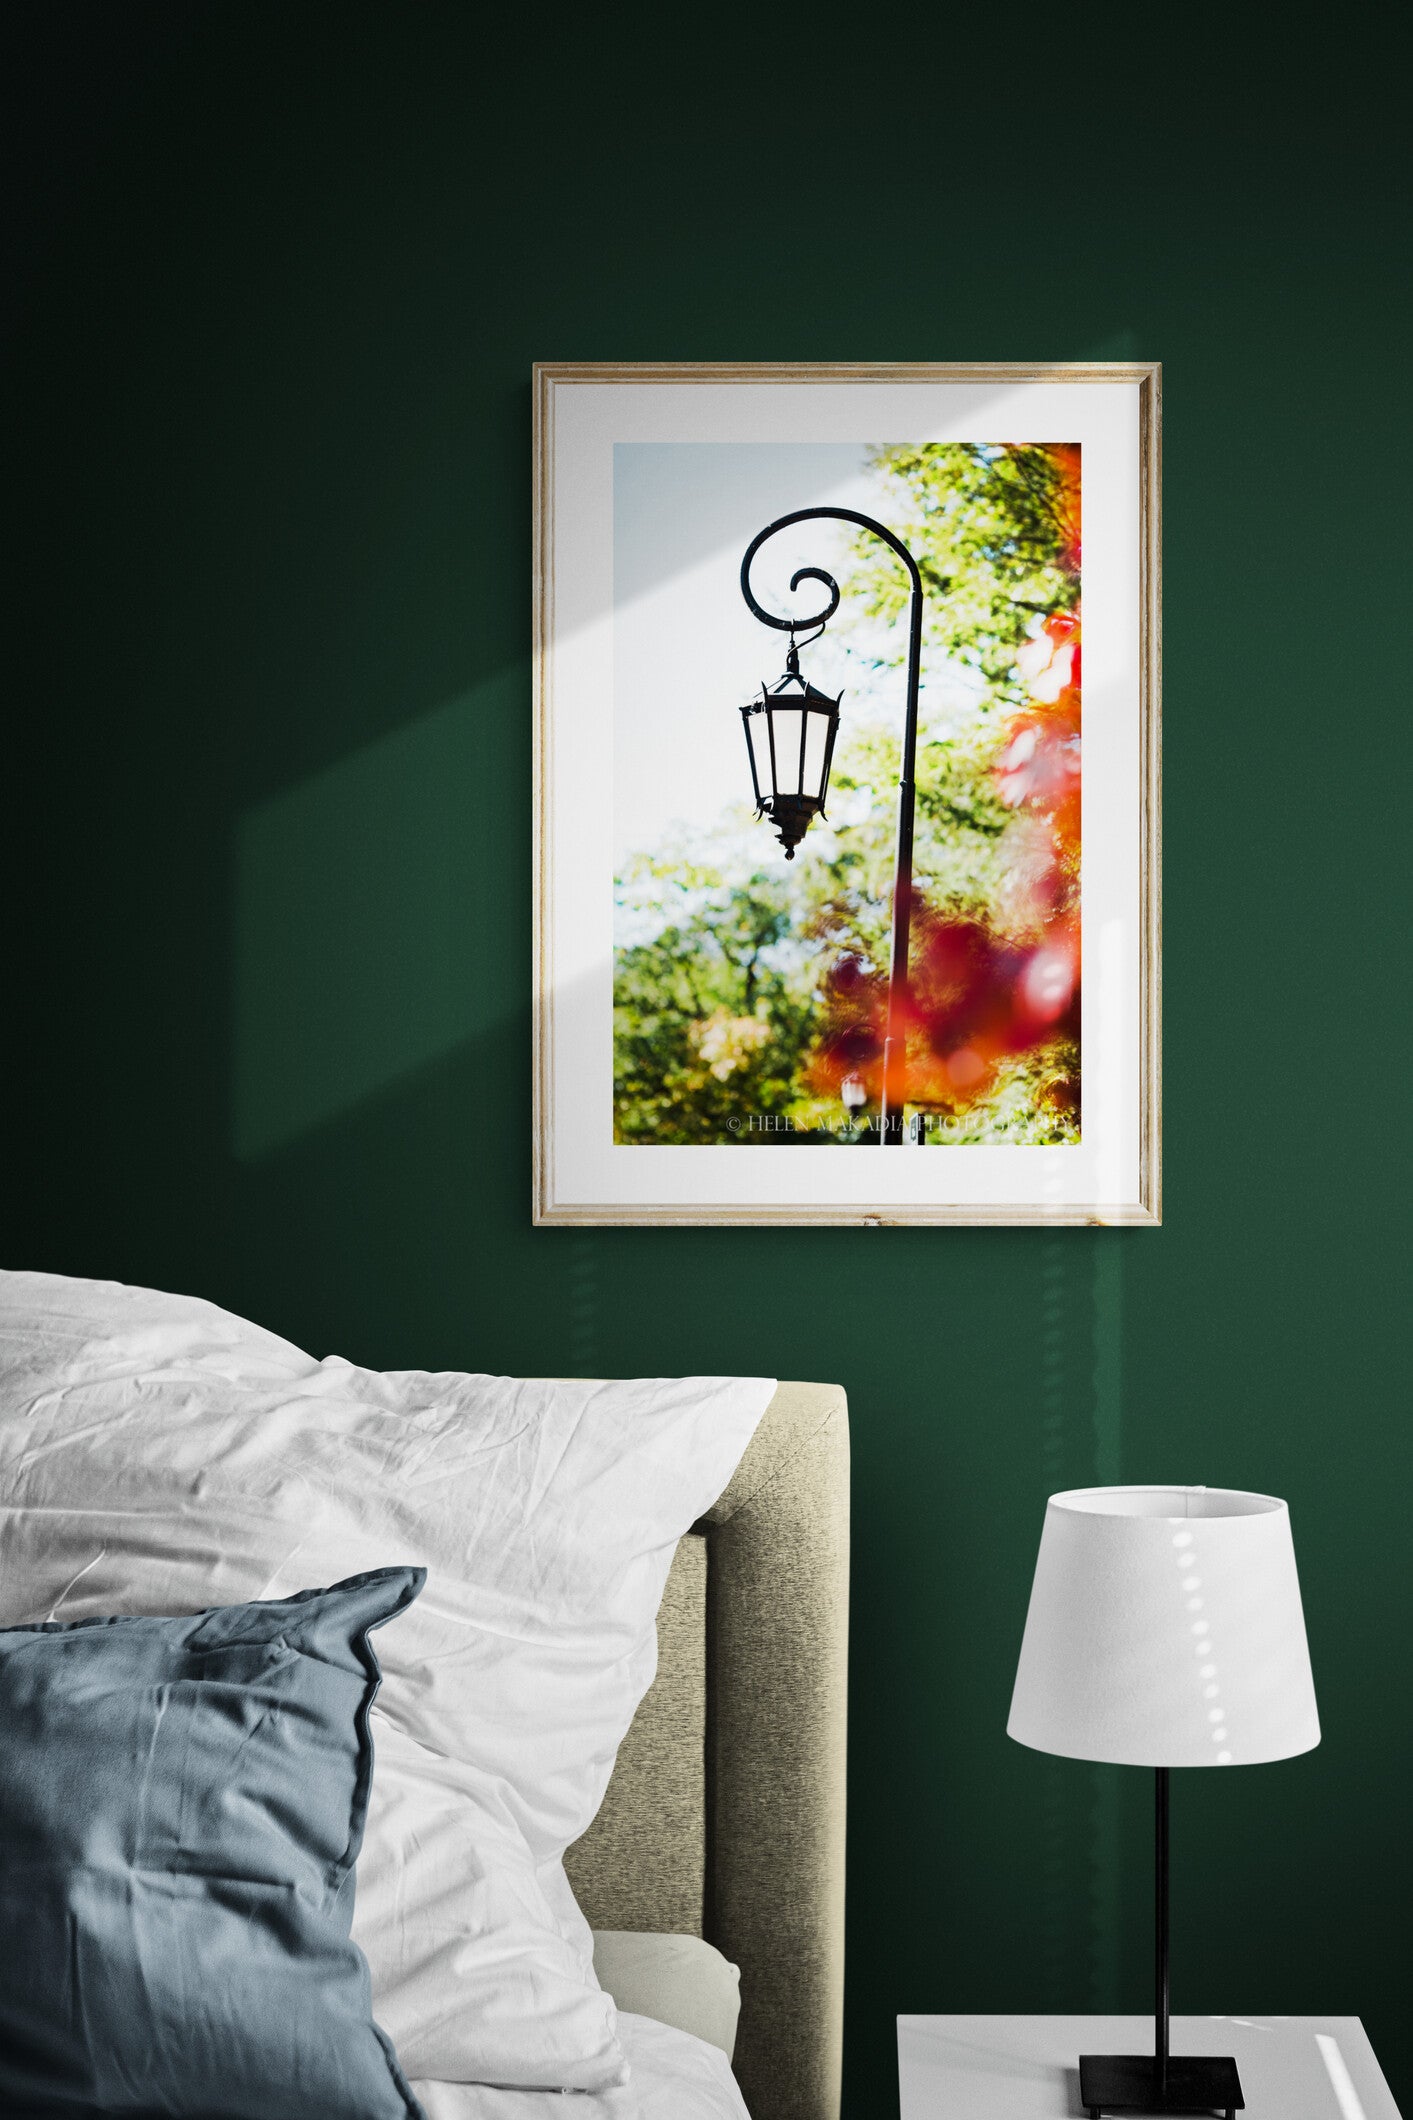 Wellesley College Lantern Photograph as Wall art in a Bedroom